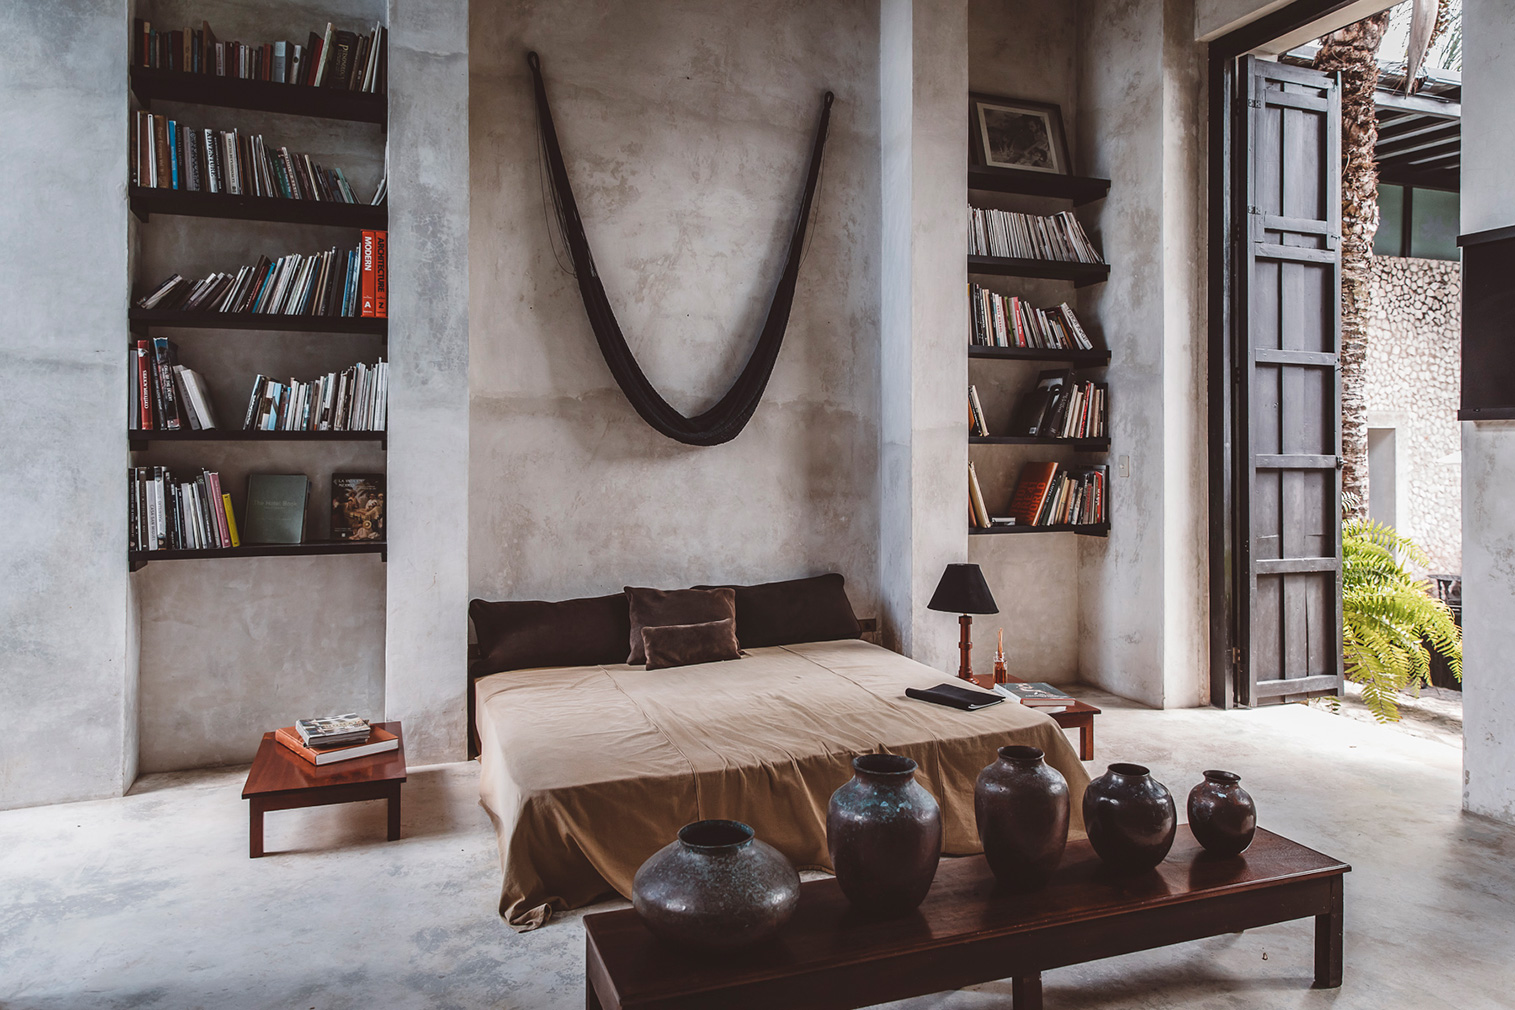 Step inside a perfumer’s historic holiday home in Valladolid, Mexico